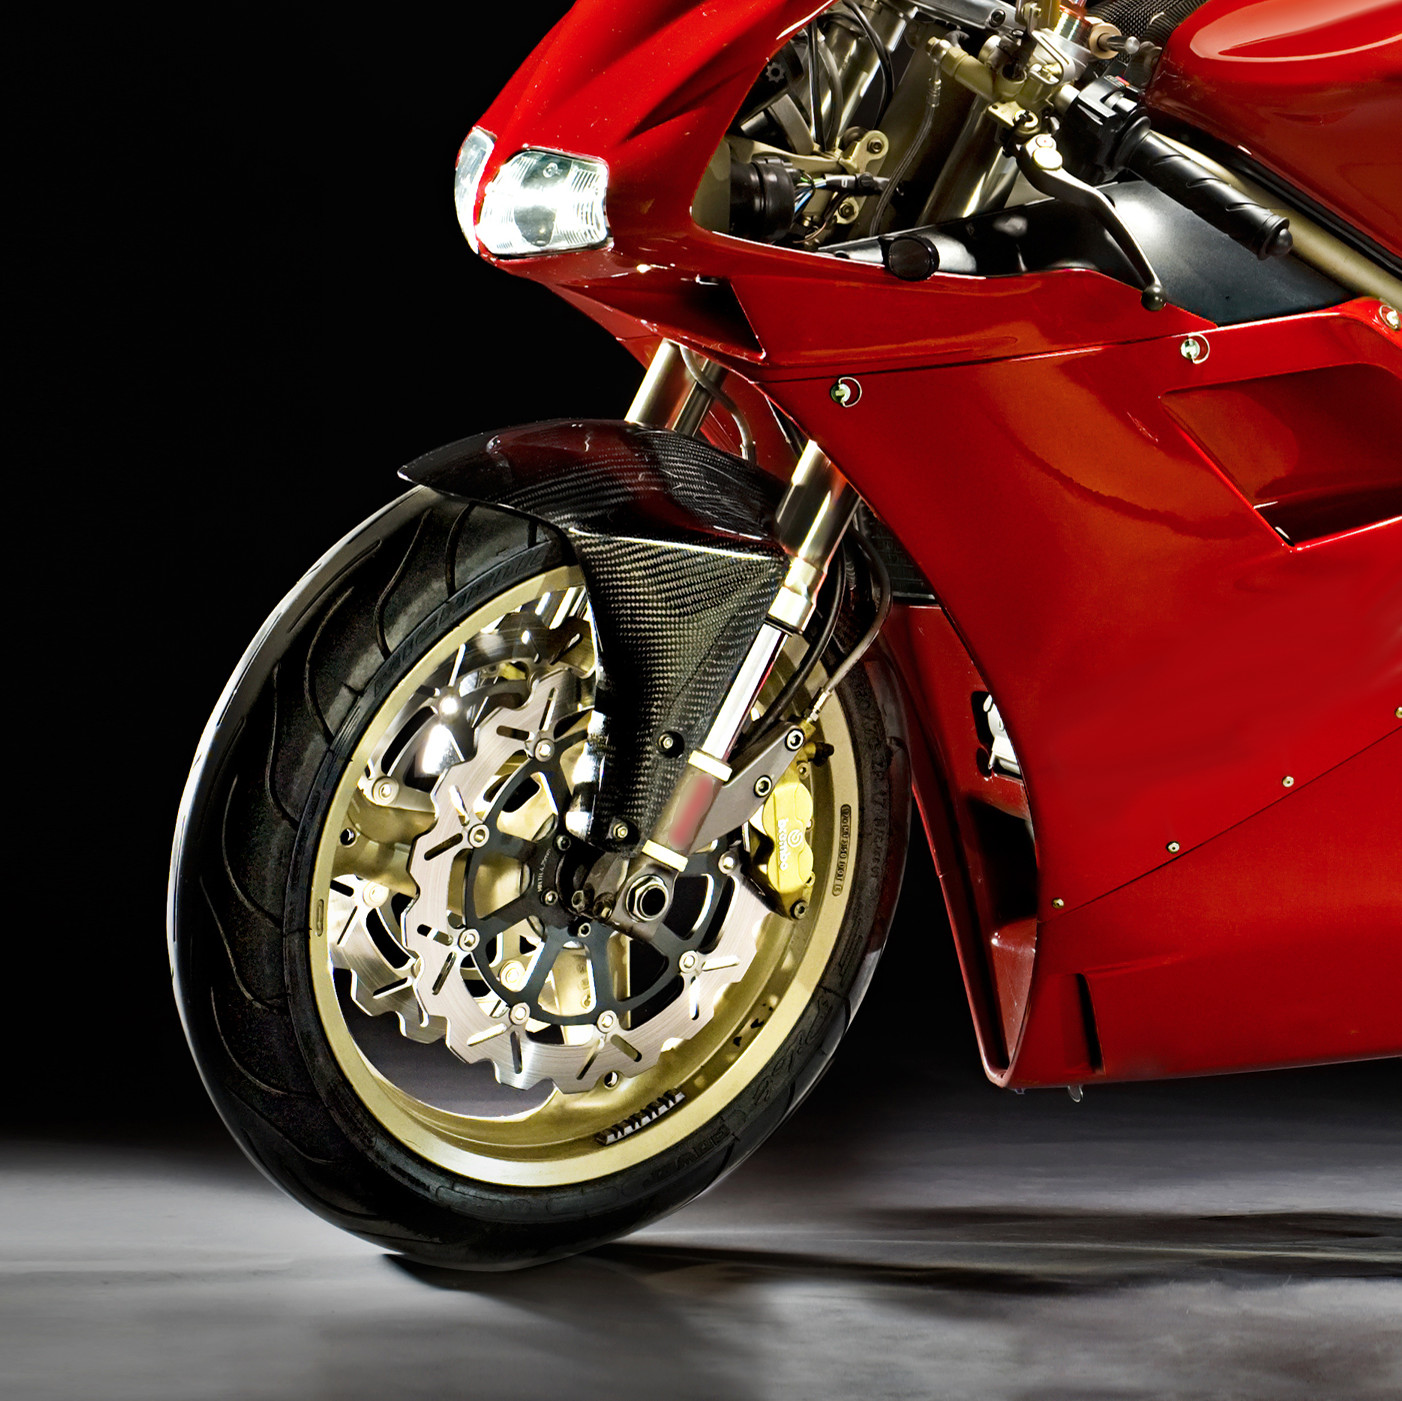 Front end of Red Motorcycle featuring gold rim on front tire